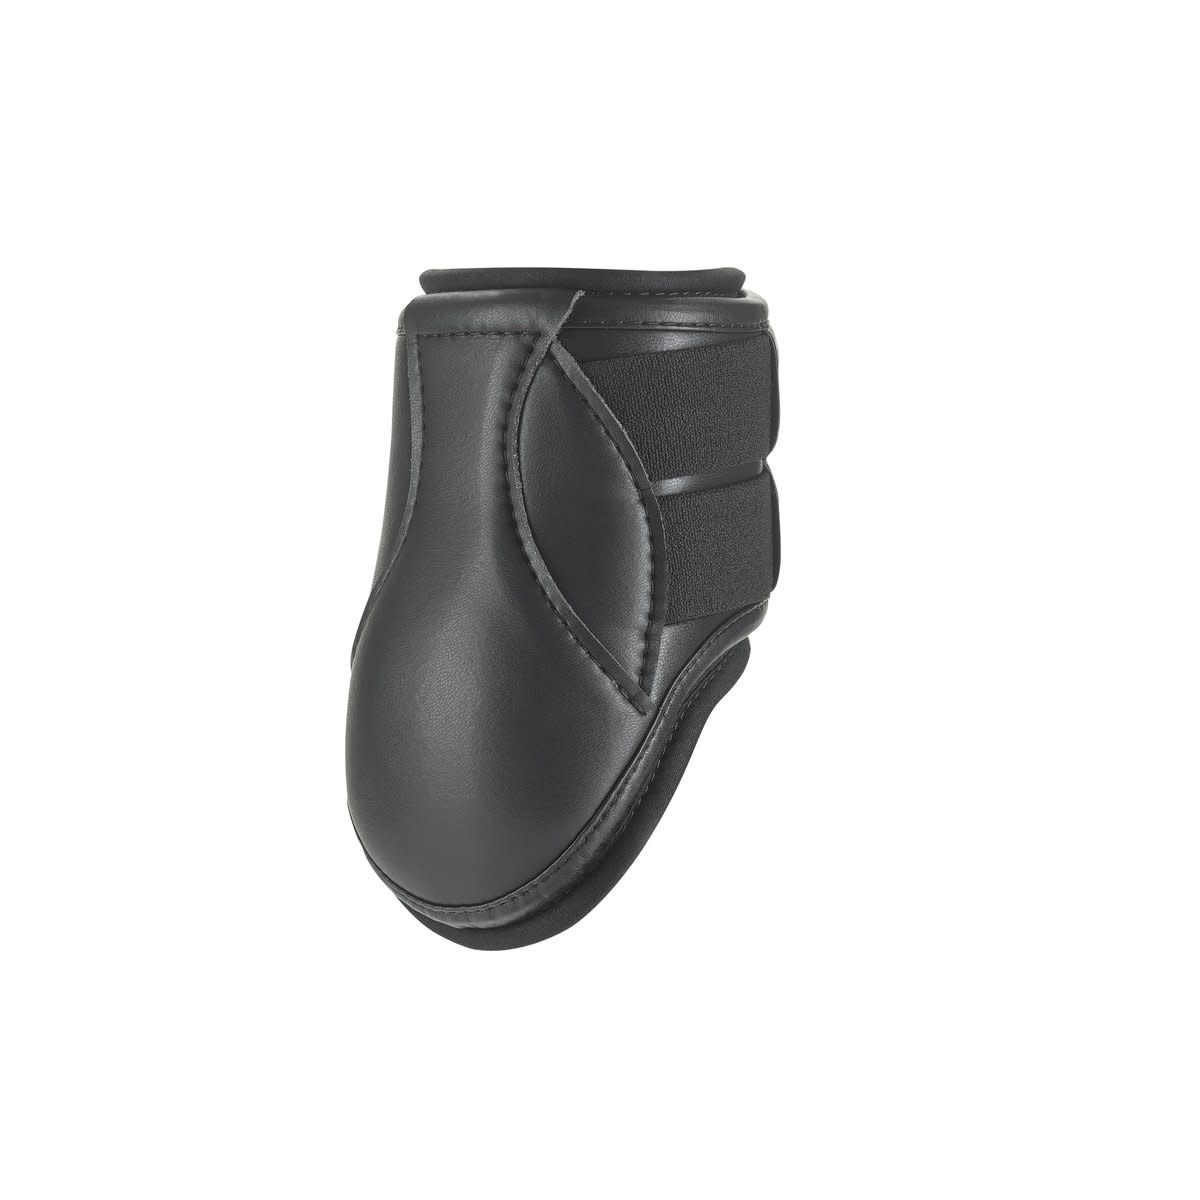 Equifit EQ-Teq Hind boot with Sheepswool liner